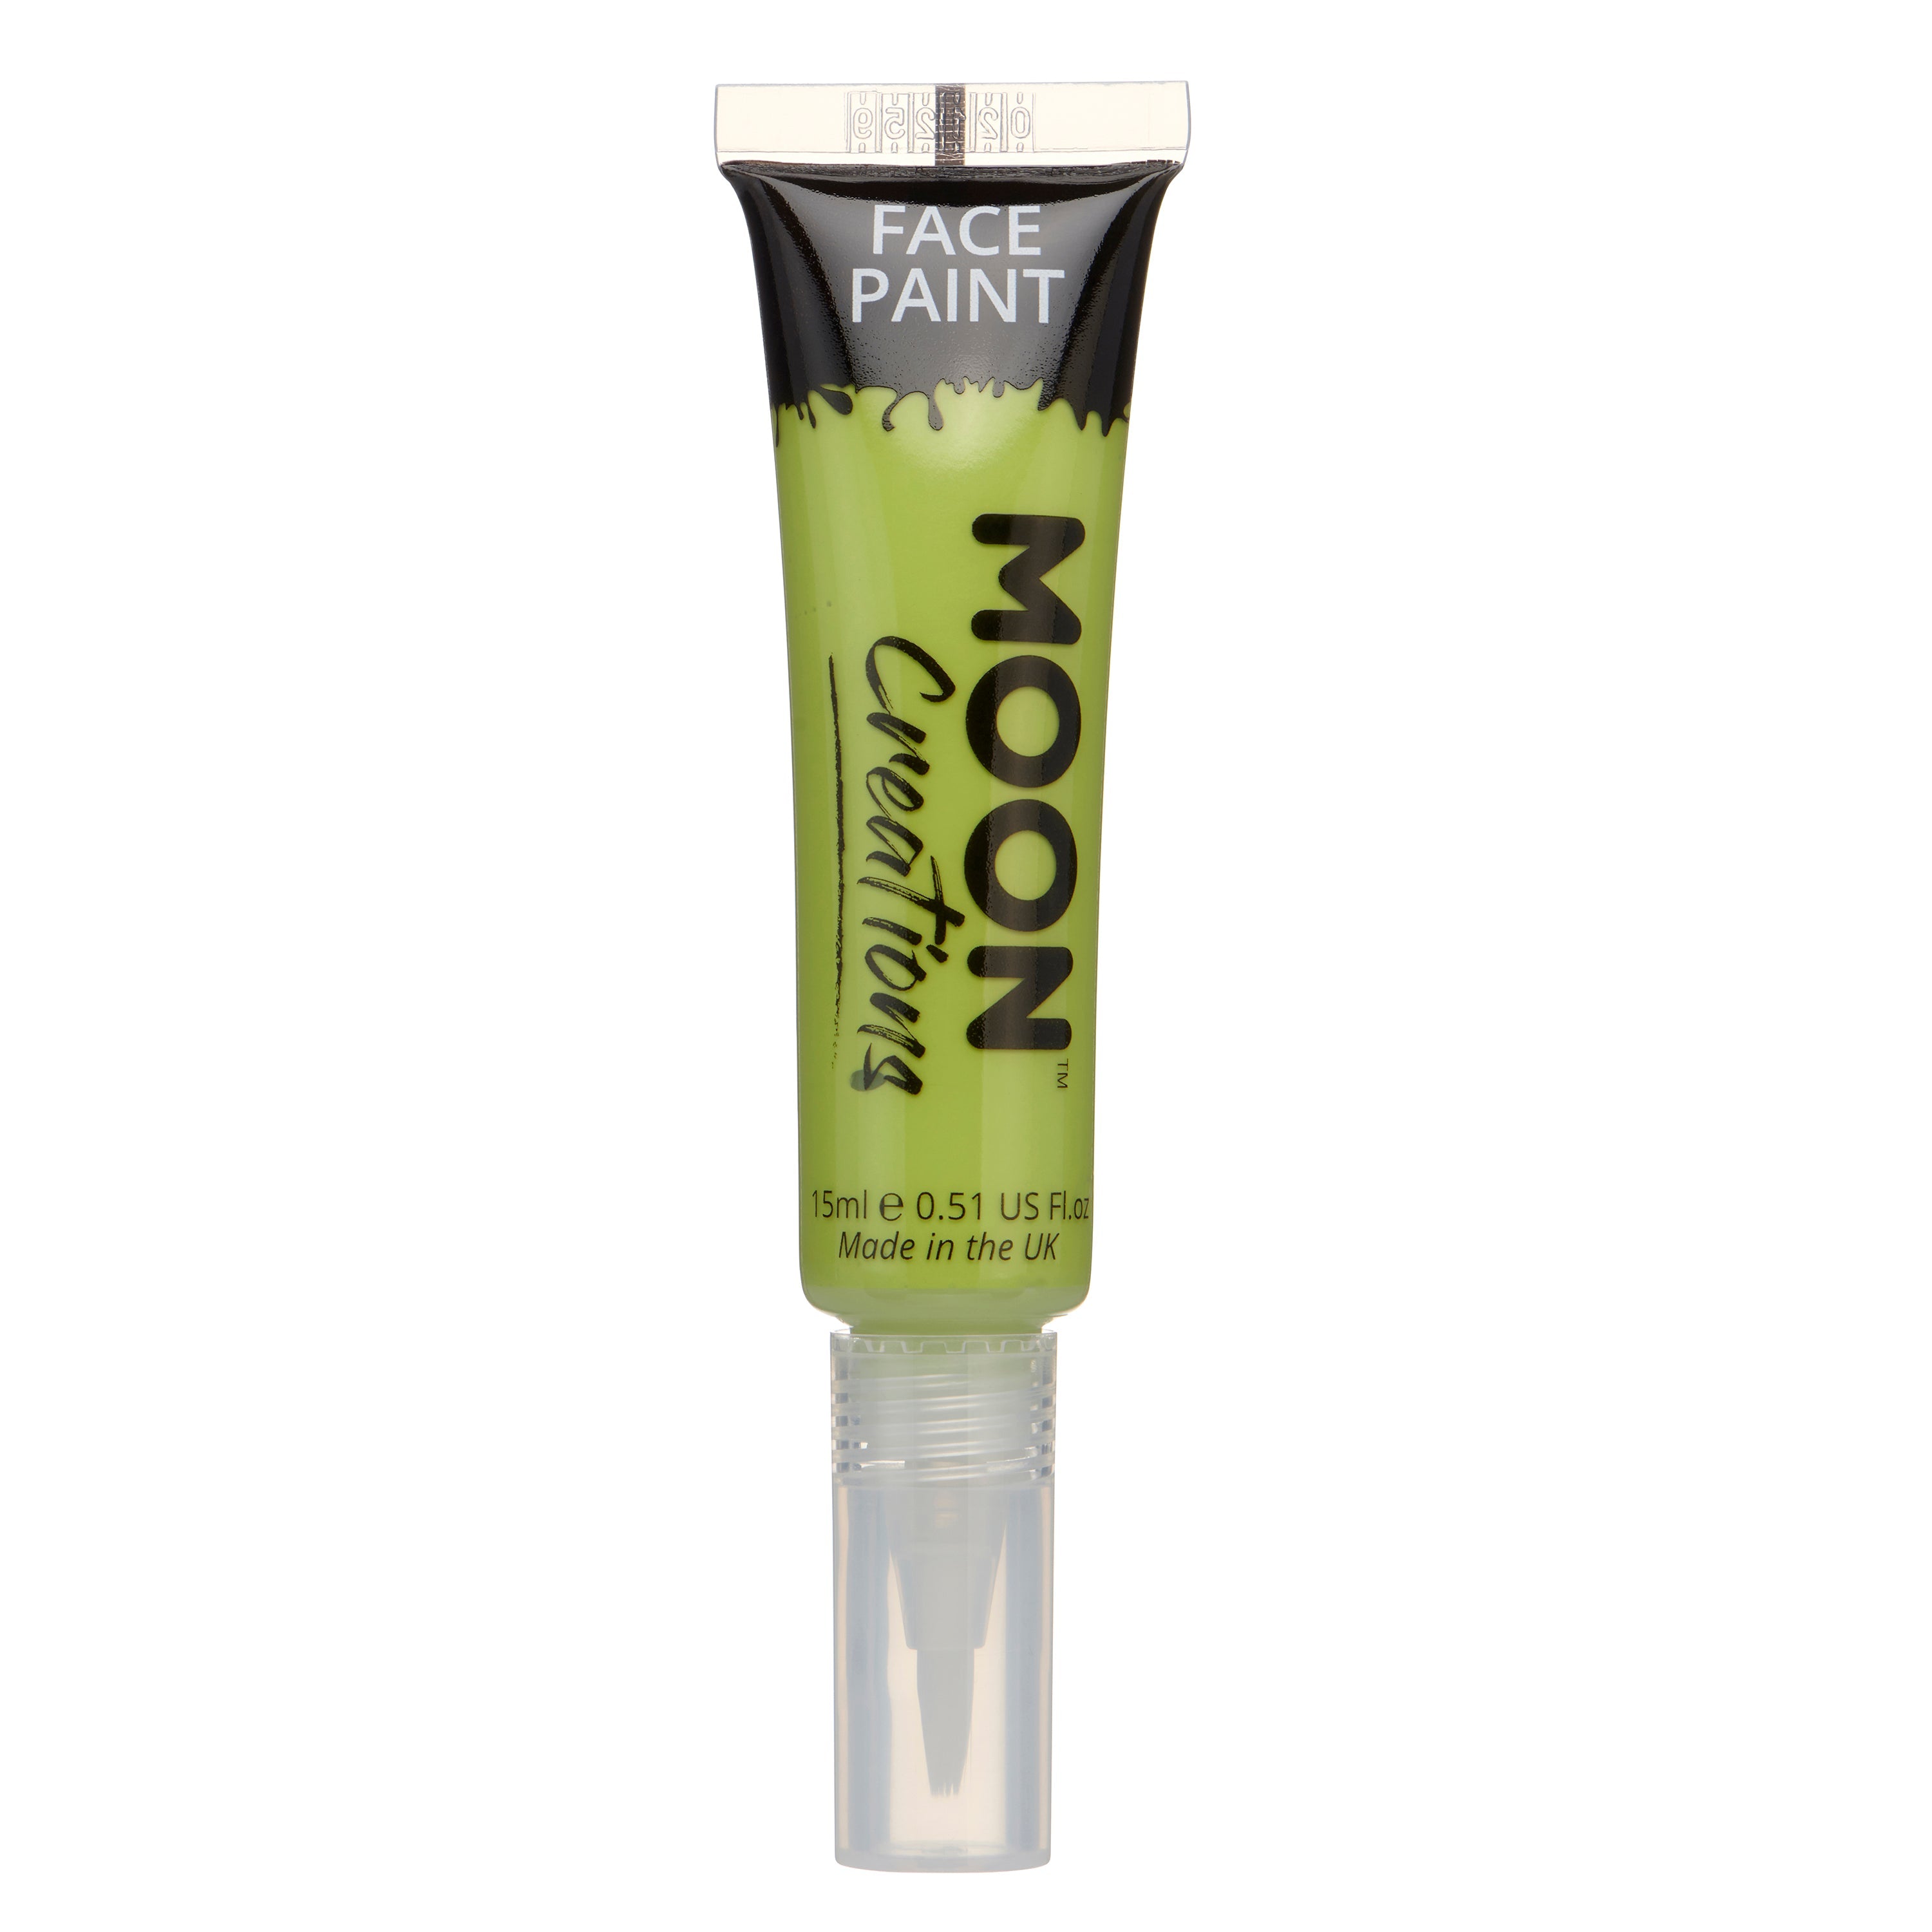 Lime Green - Face & Body Paint Makeup w/brush, 15mL. Cosmetically certified, FDA & Health Canada compliant, cruelty free and vegan.